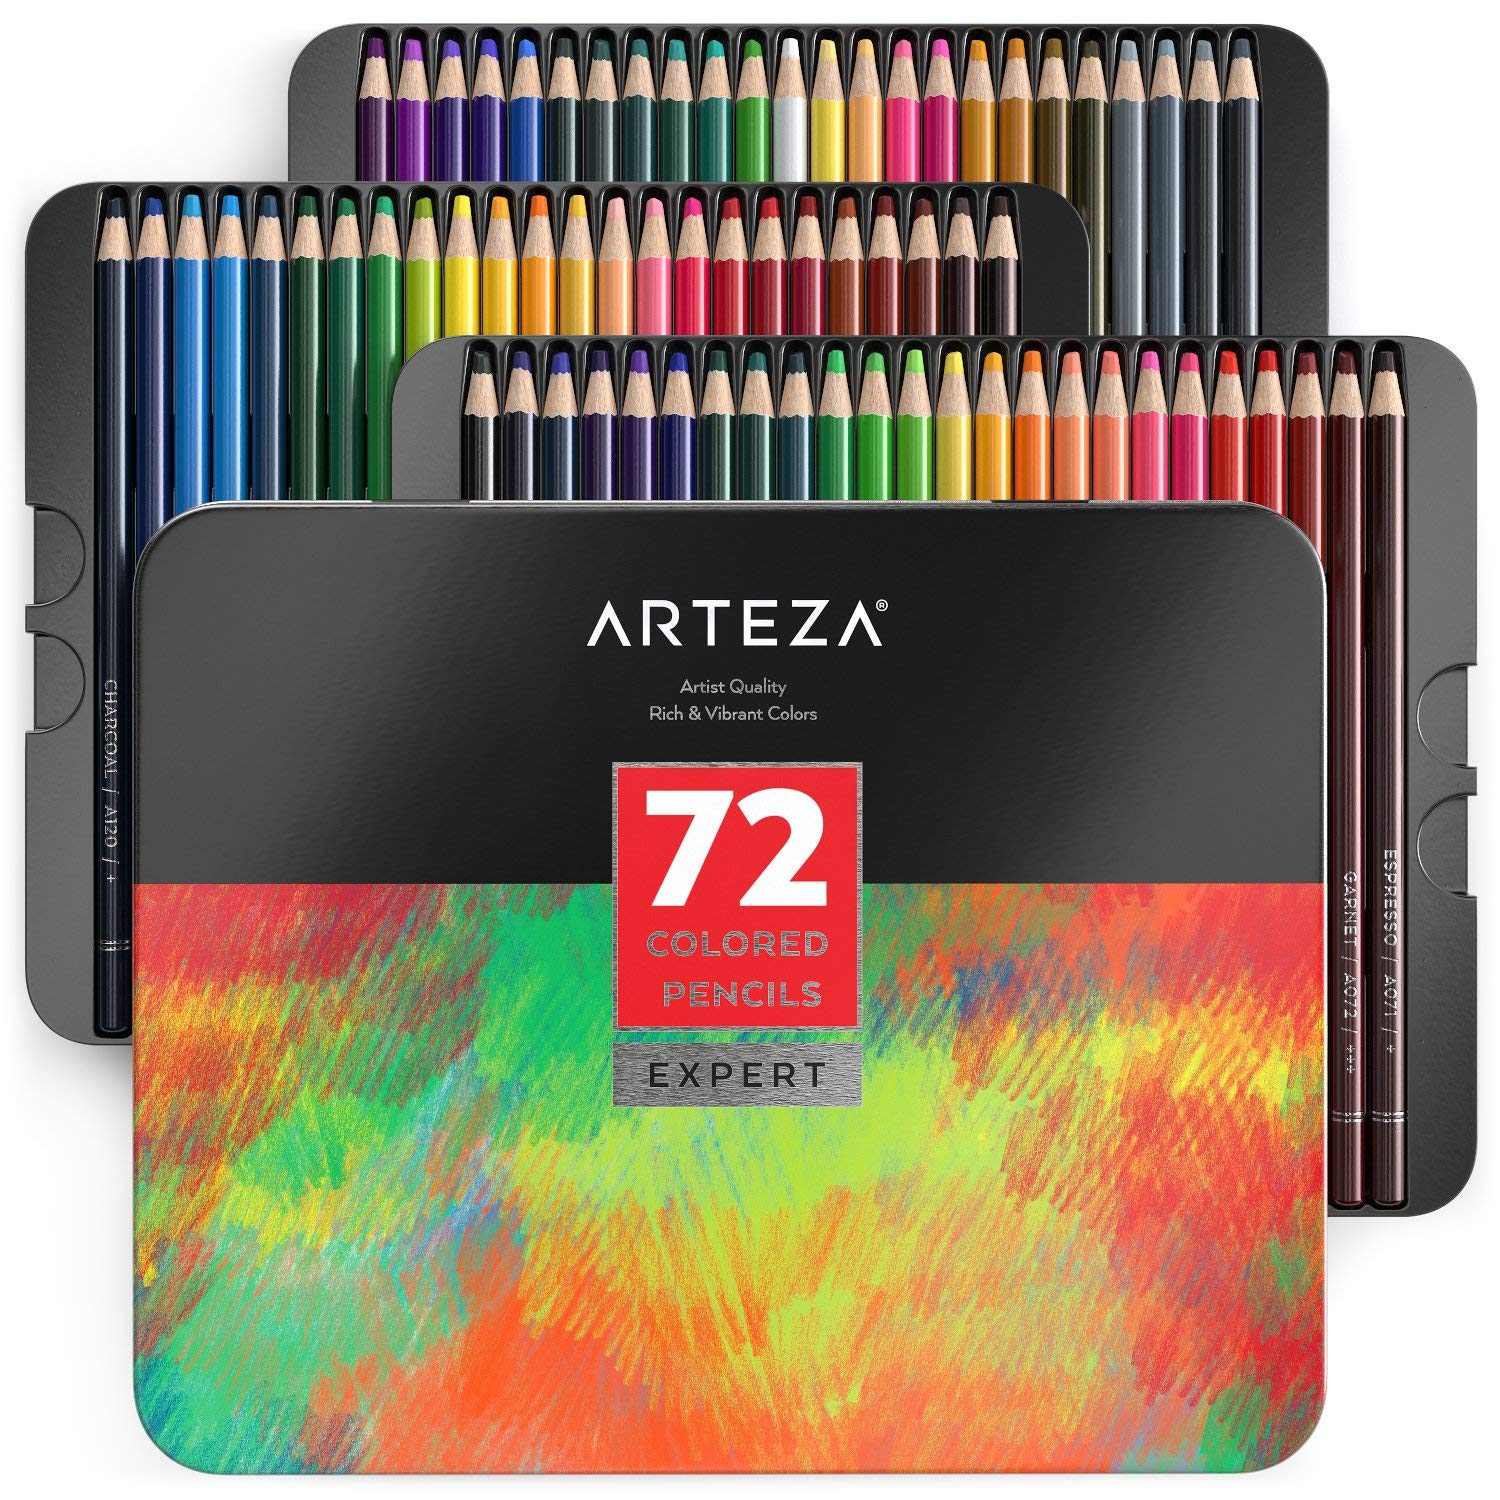 LIGHTNING DEAL ALERT! Start Journaling in 2019! These colored pencils are 43% off plus $5 extra off